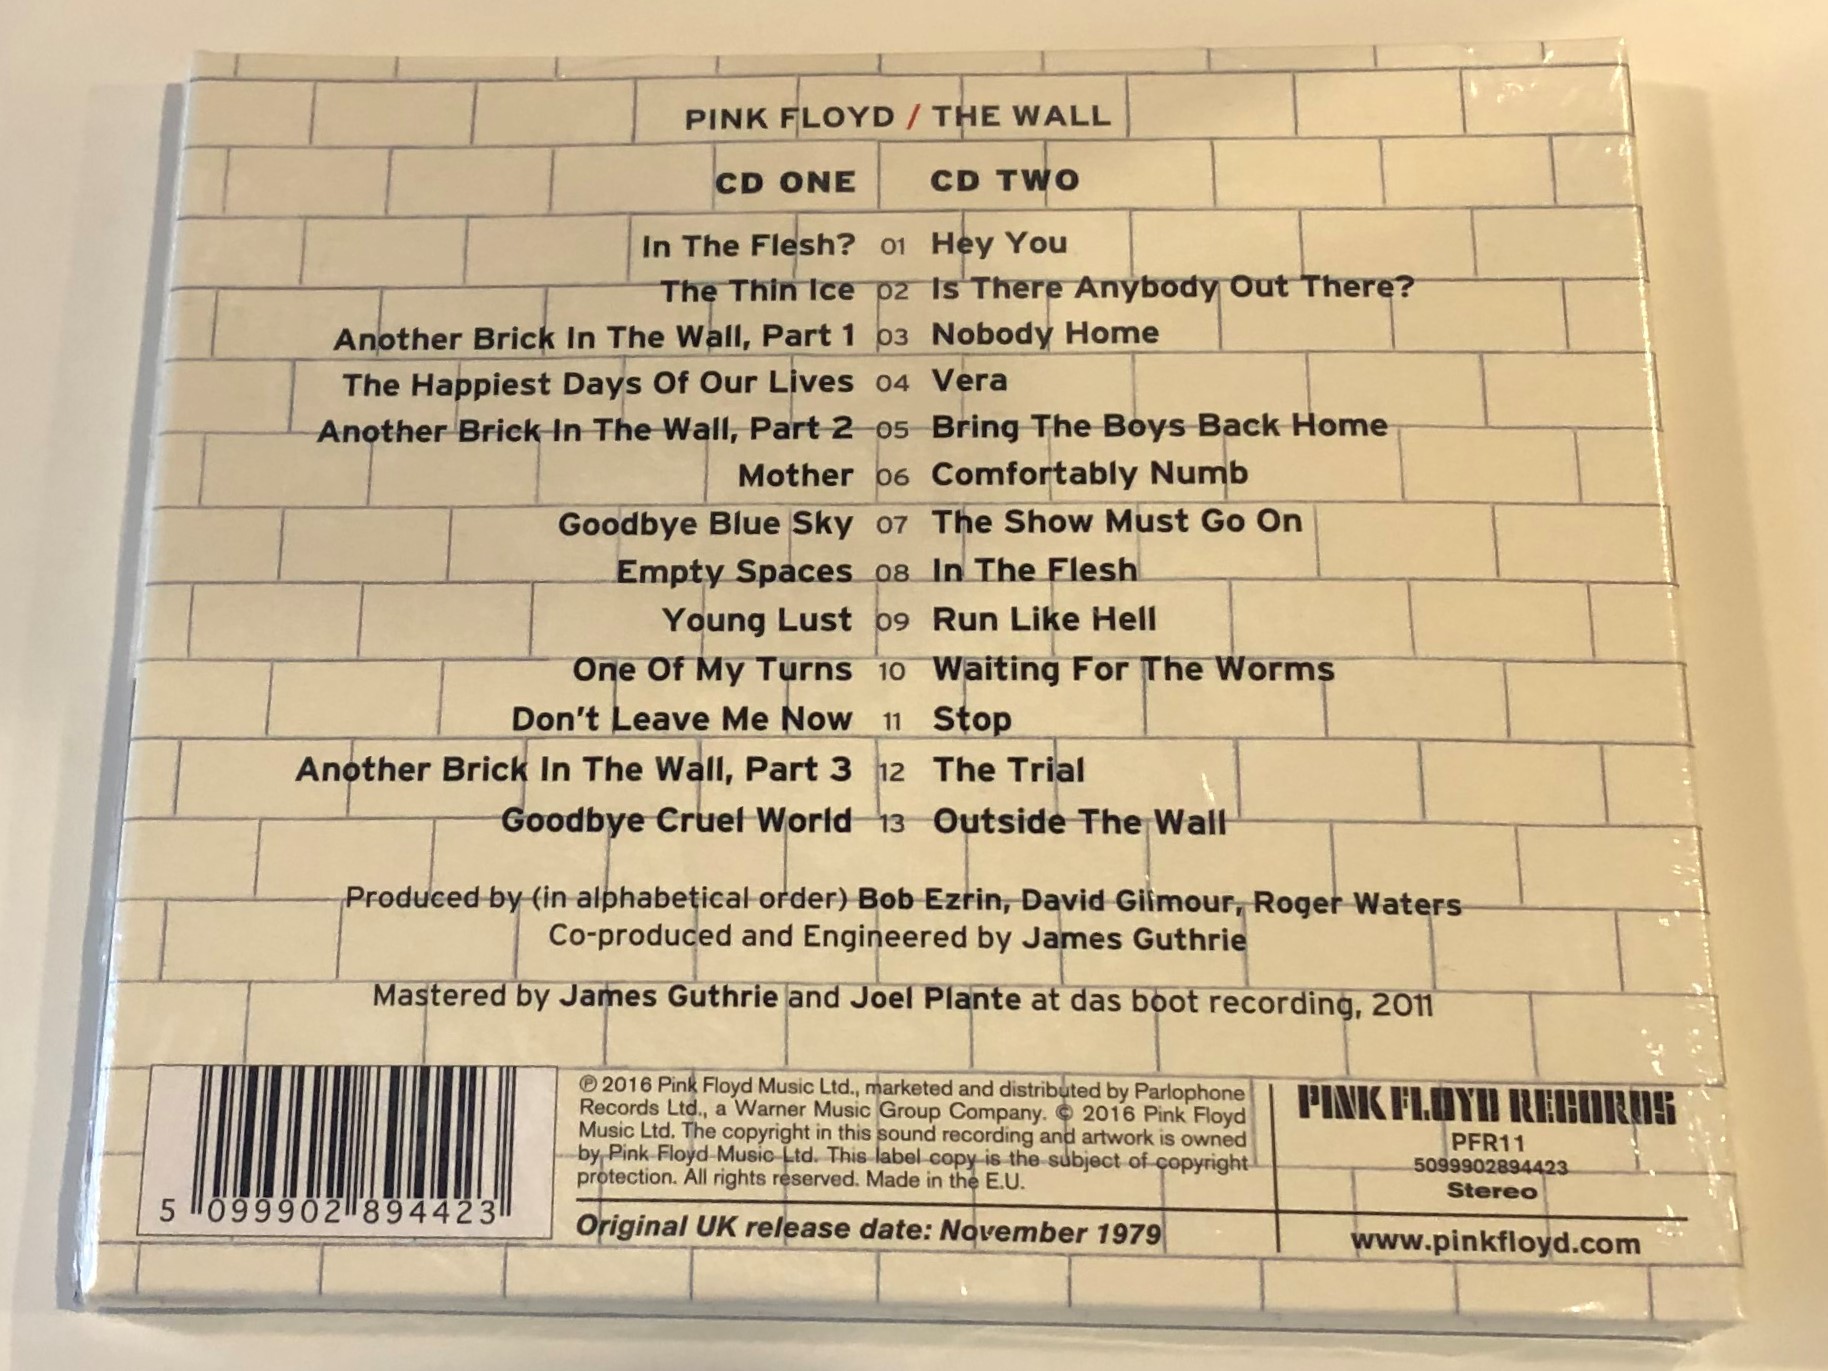 pink-floyd-the-wall-pink-floyd-records-2x-audio-cd-2016-stereo-pfr11-2-.jpg